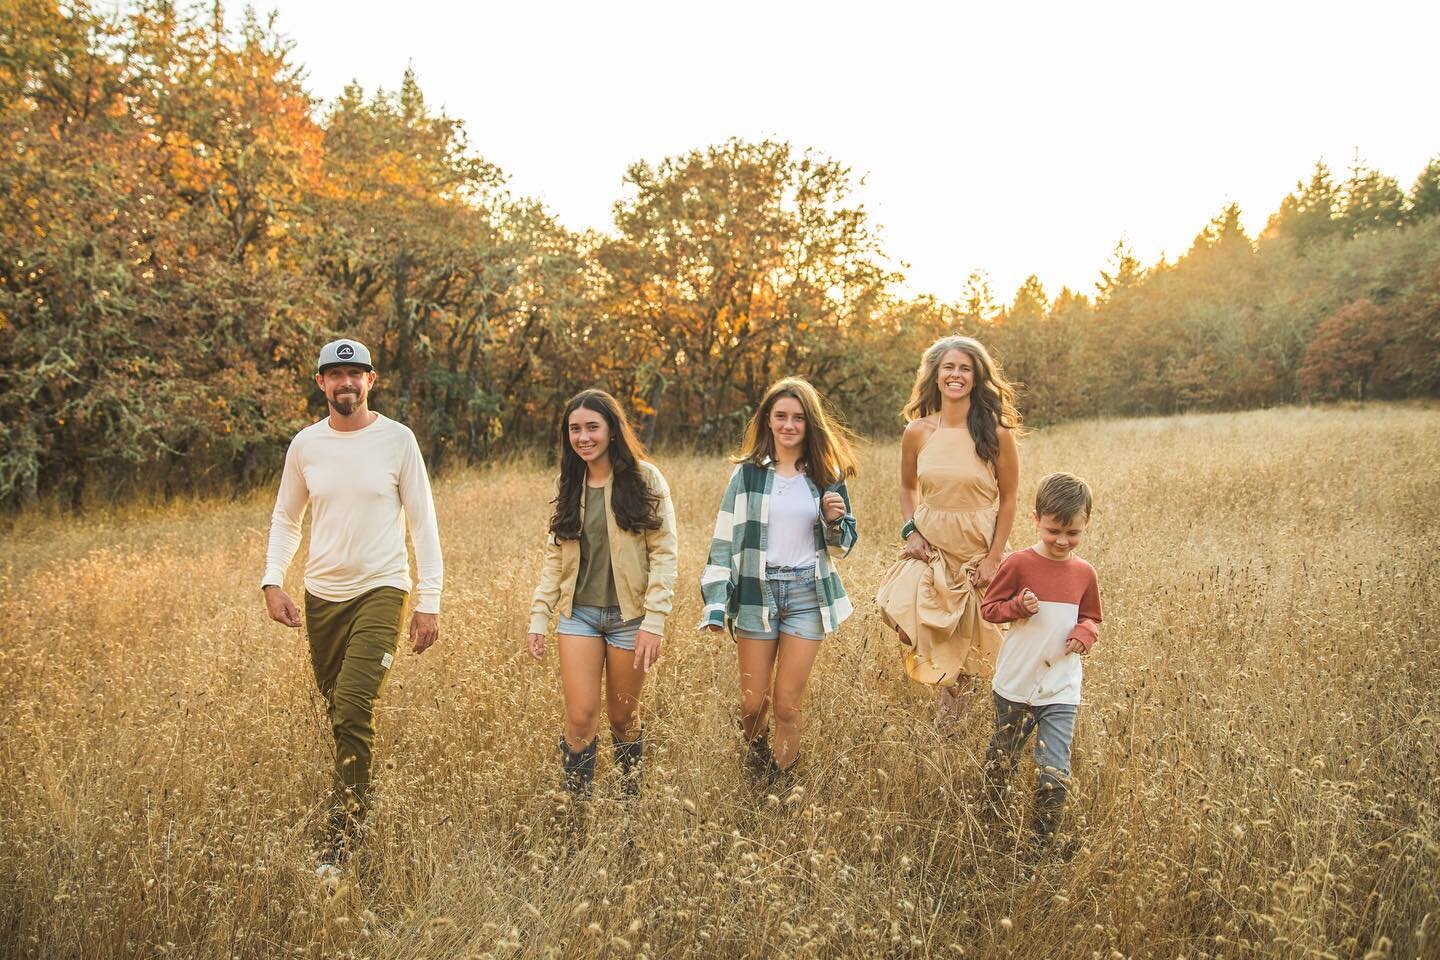 I&rsquo;ve been returning to the same location with this beloved family for a few years now and it just keeps getting better and better.

The golden October sunset, the yellow grass and the light in the trees are all the same - but those kiddos are g